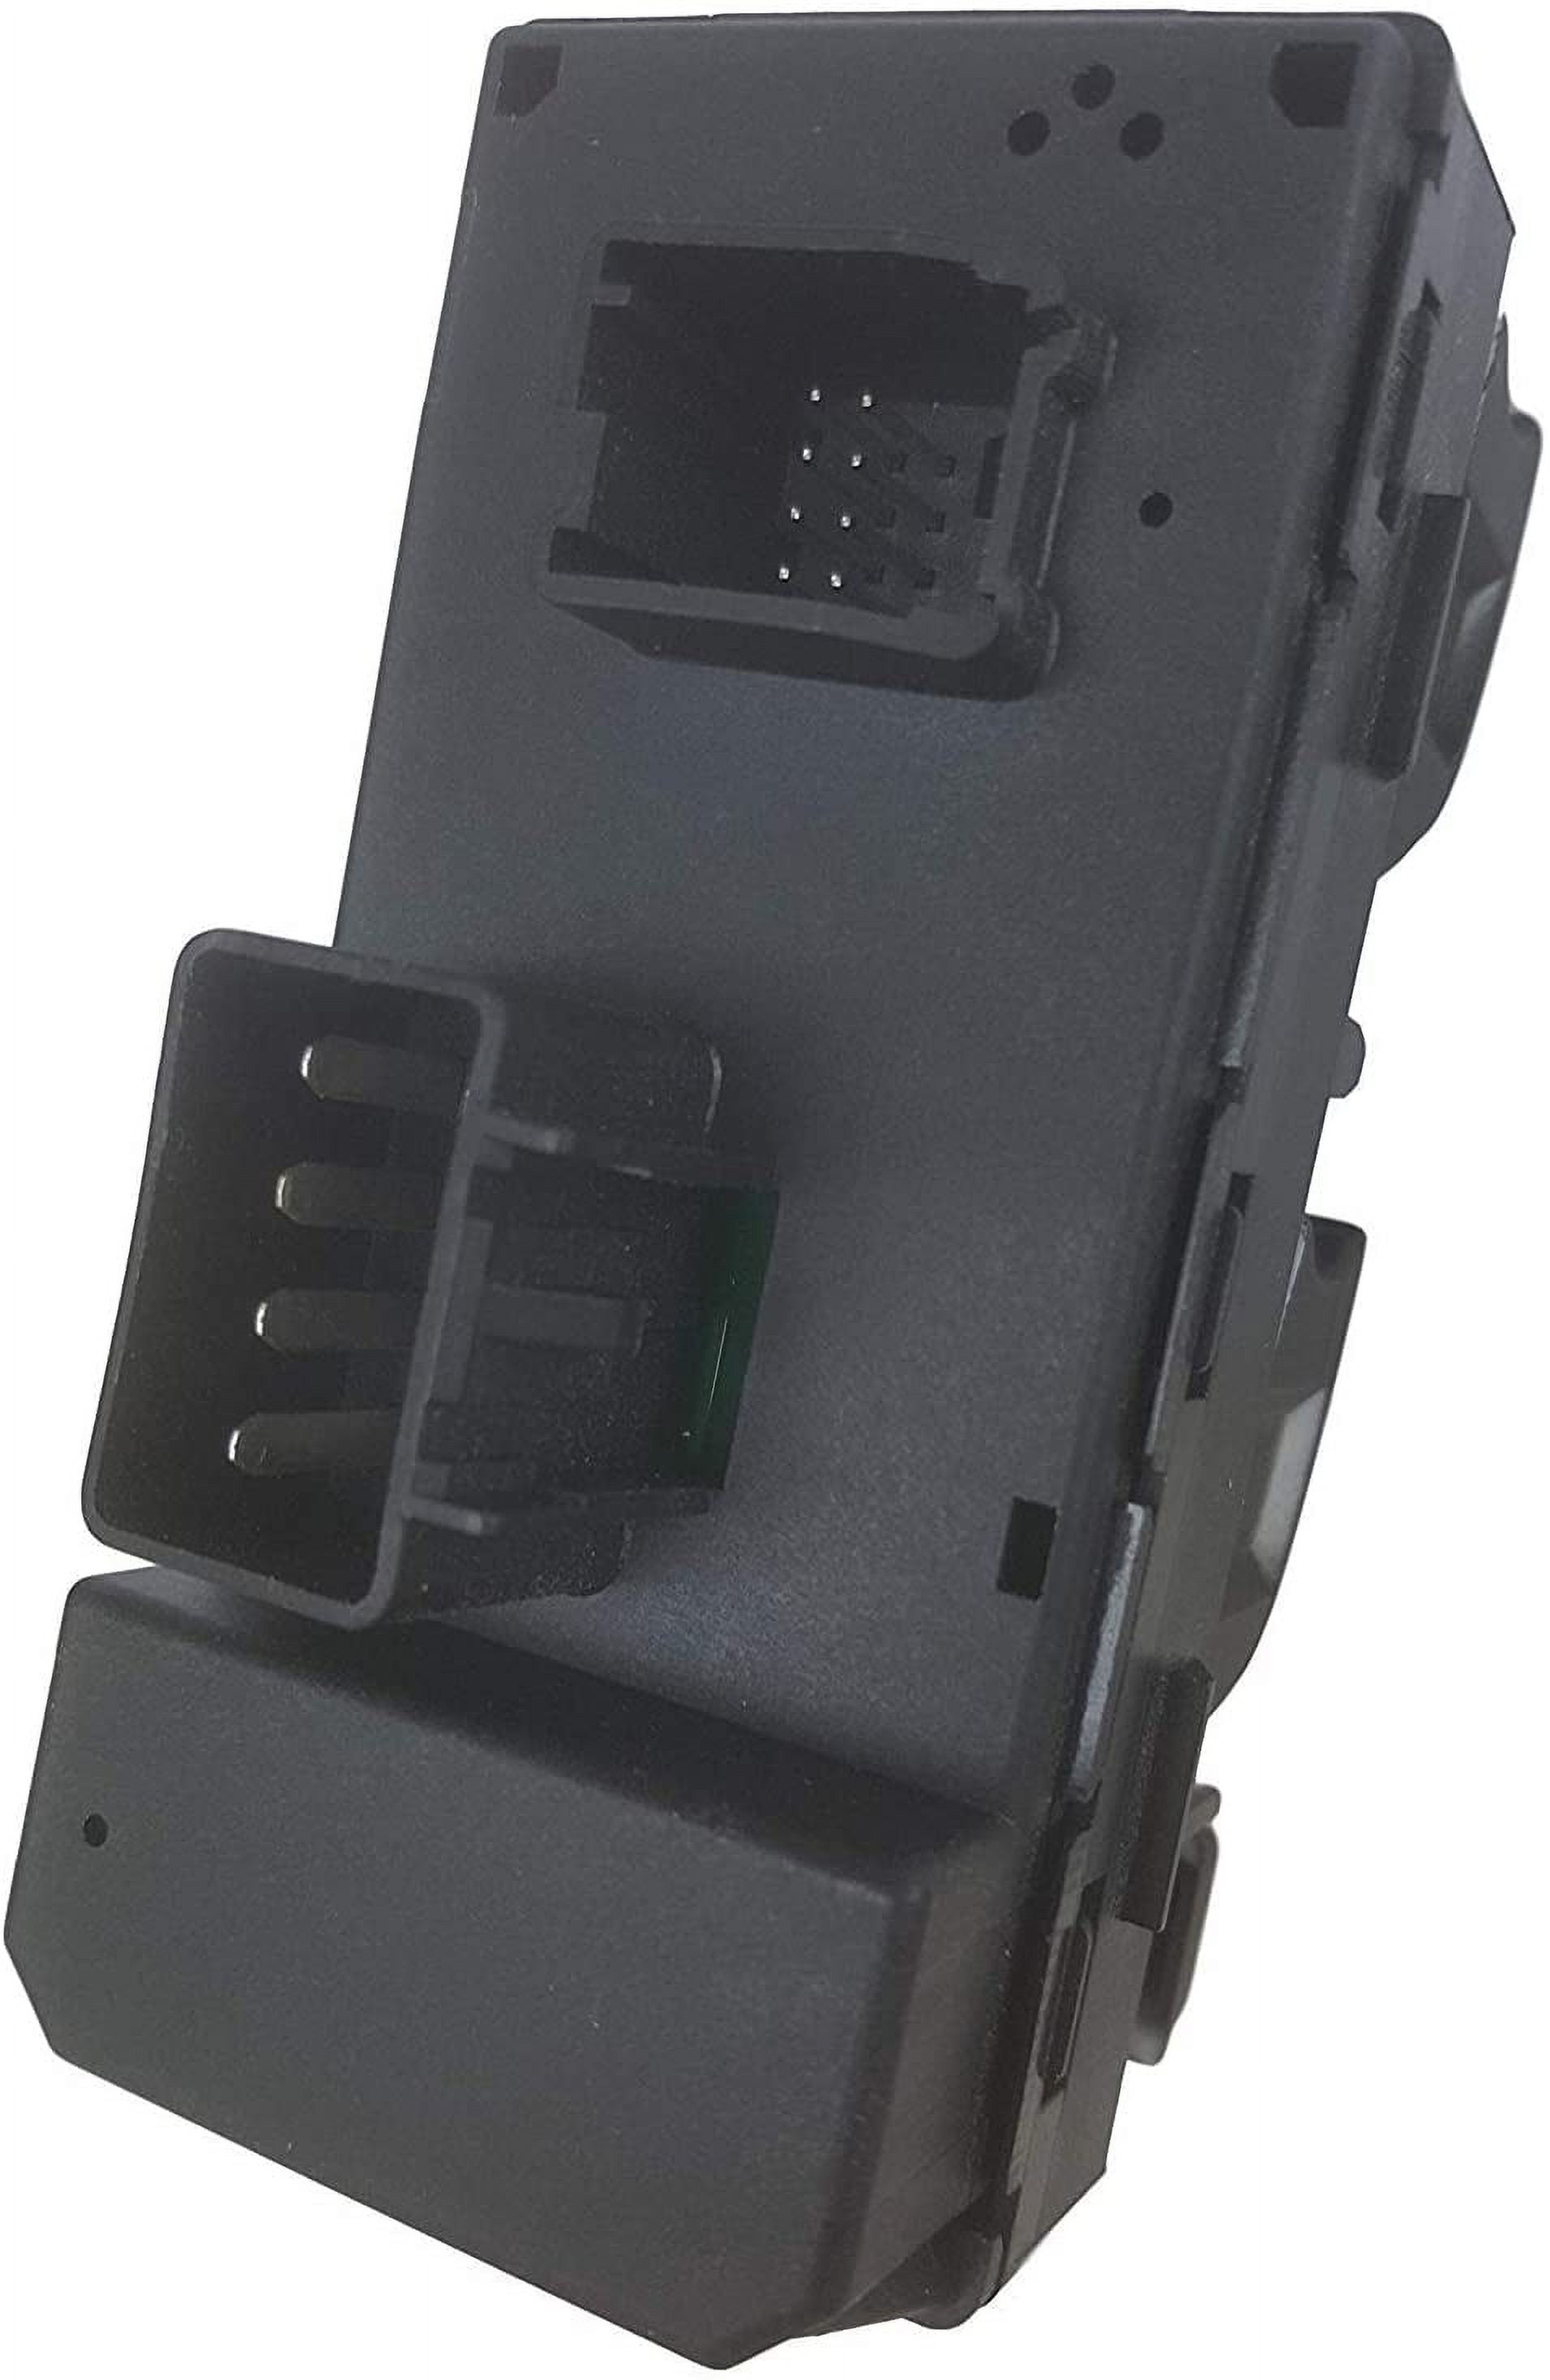 SWITCHDOCTOR Window Master Switch for 2007-2013 Chevrolet Silverado 1500 2500 3500 and GMC Sierra 1500 2500 3500, 2009-2011 HHR, 2009-2016 Traverse - image 2 of 8